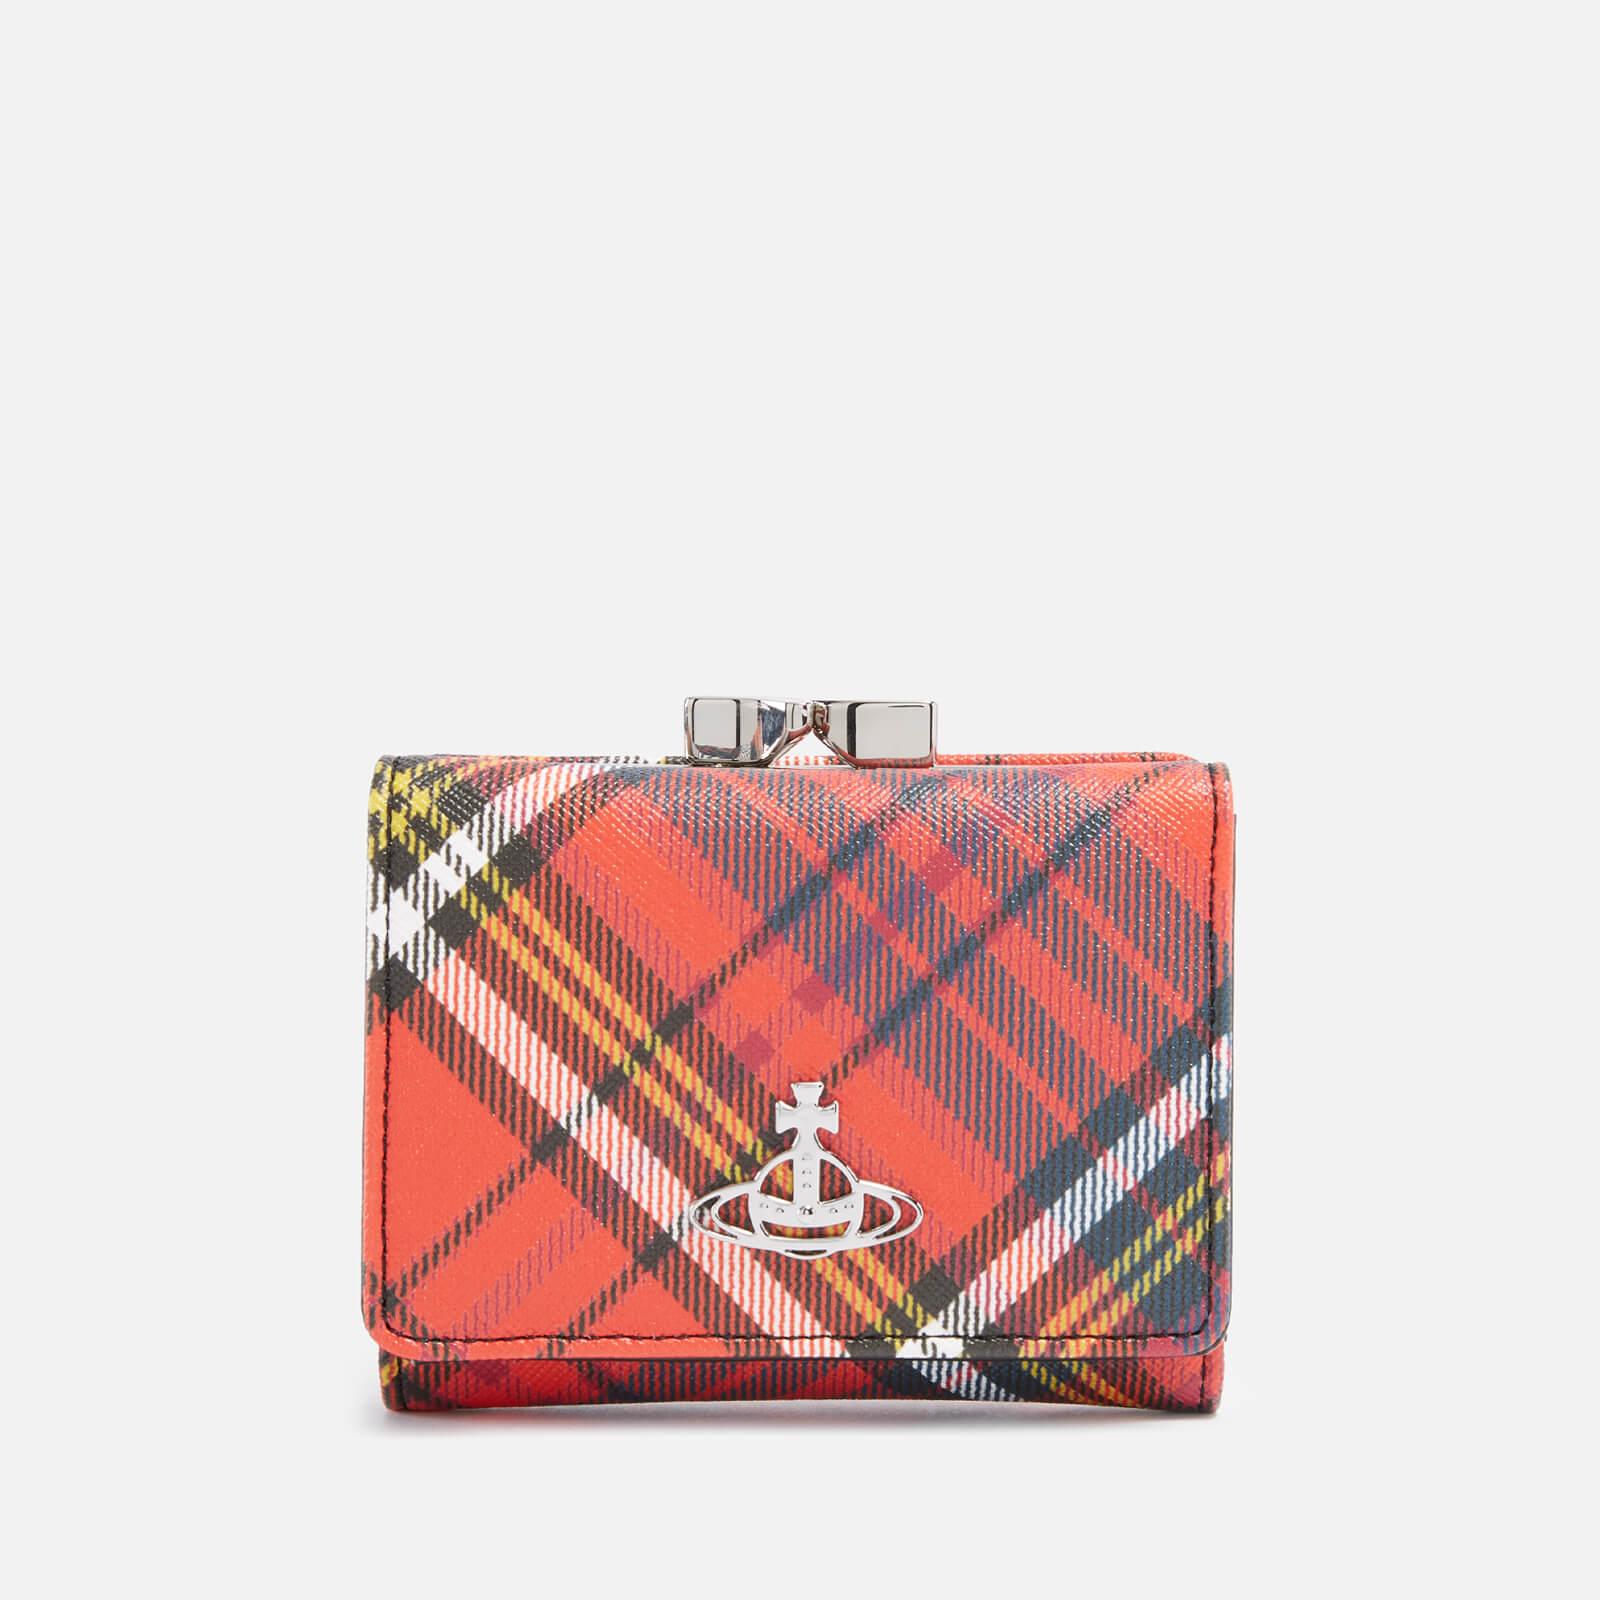 Vivienne Westwood Saffiano Faux Leather Wallet in Red | Lyst